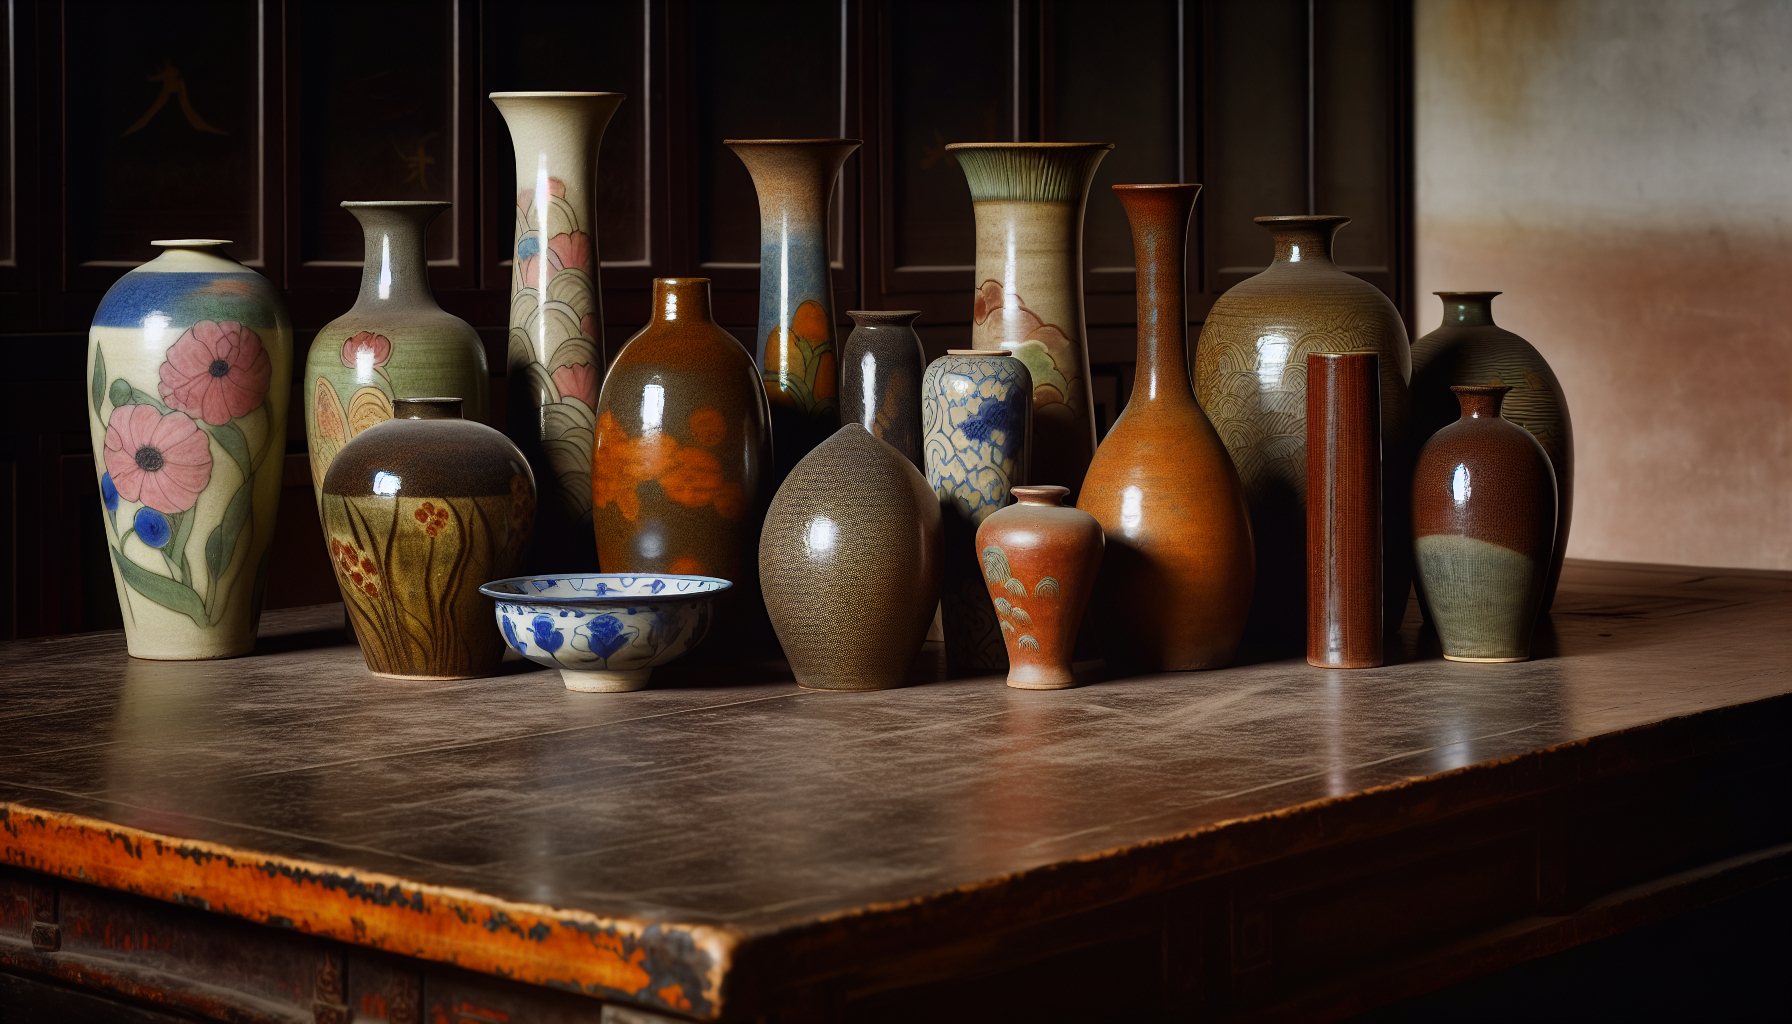 Various ceramic vases on a wooden table